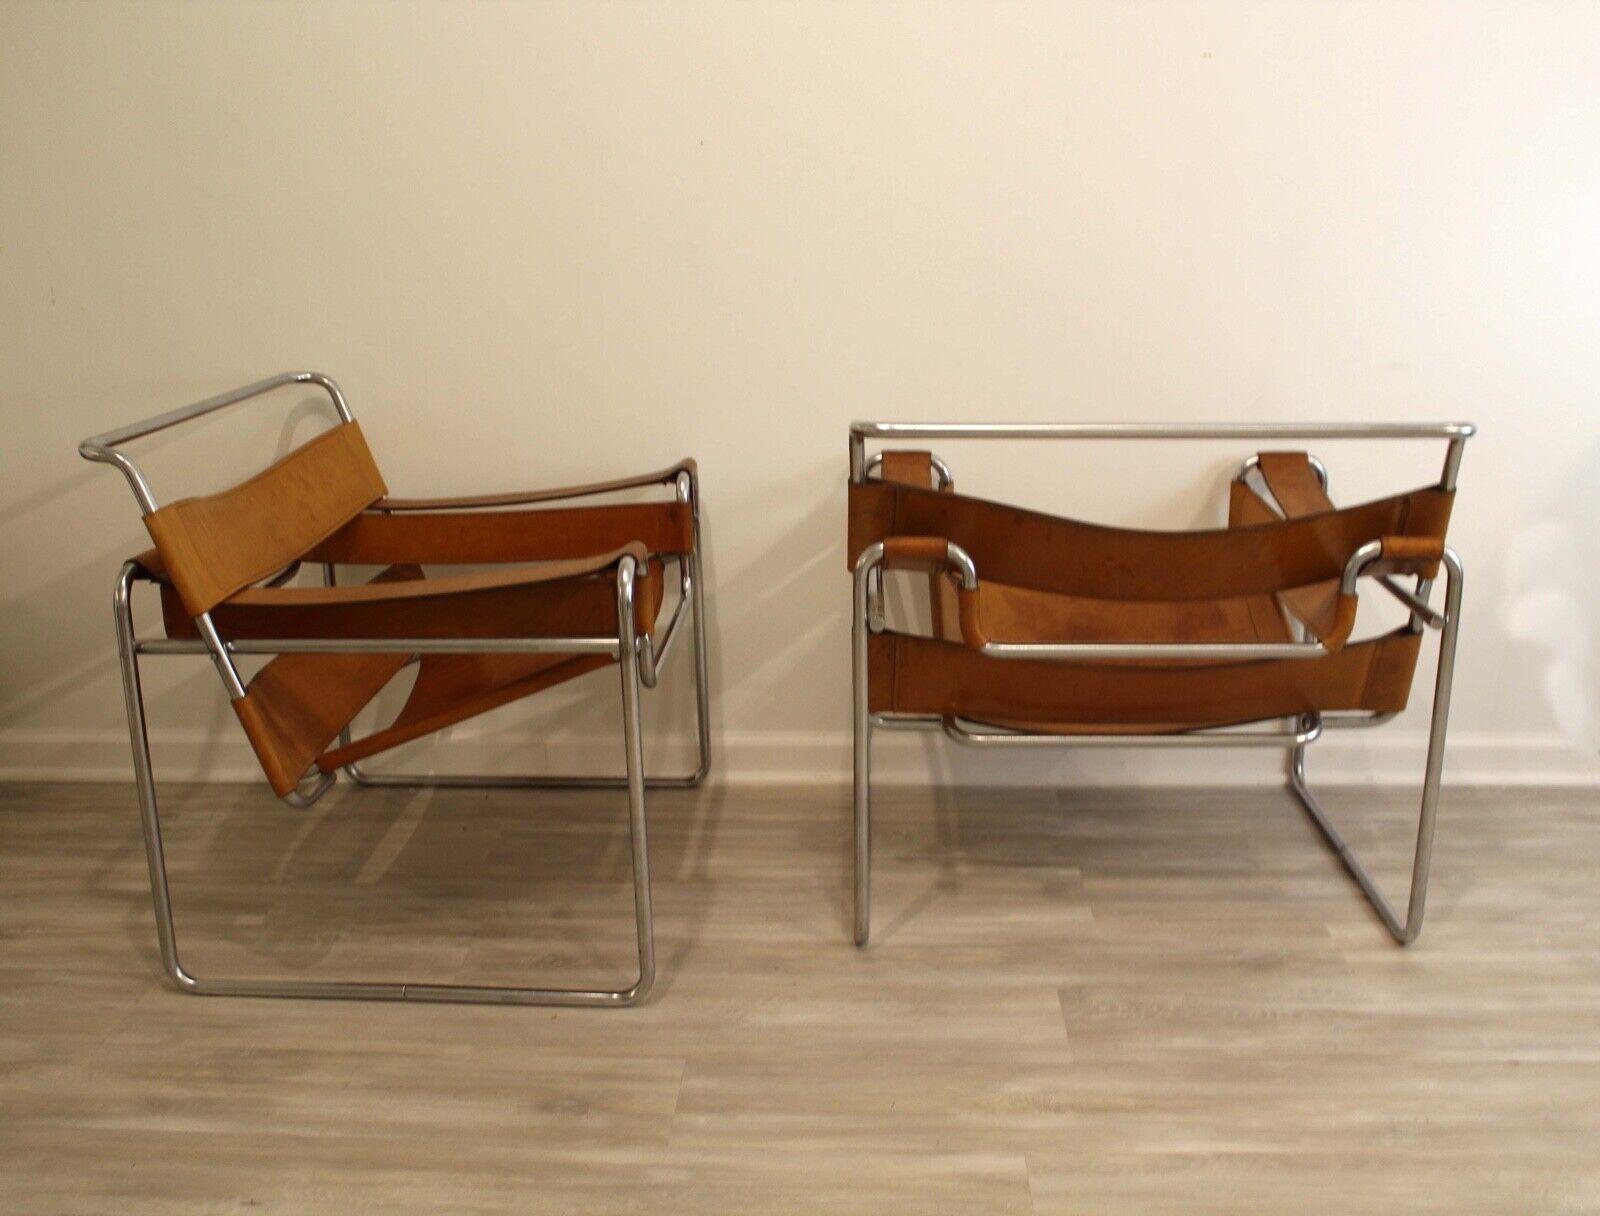 From Le Shoppe Too we have a pair of original vintage Wassily chairs in beautiful cognac leather. In great condition. Patina is appropriate to the age and use of these chairs.
Dimensions: 31